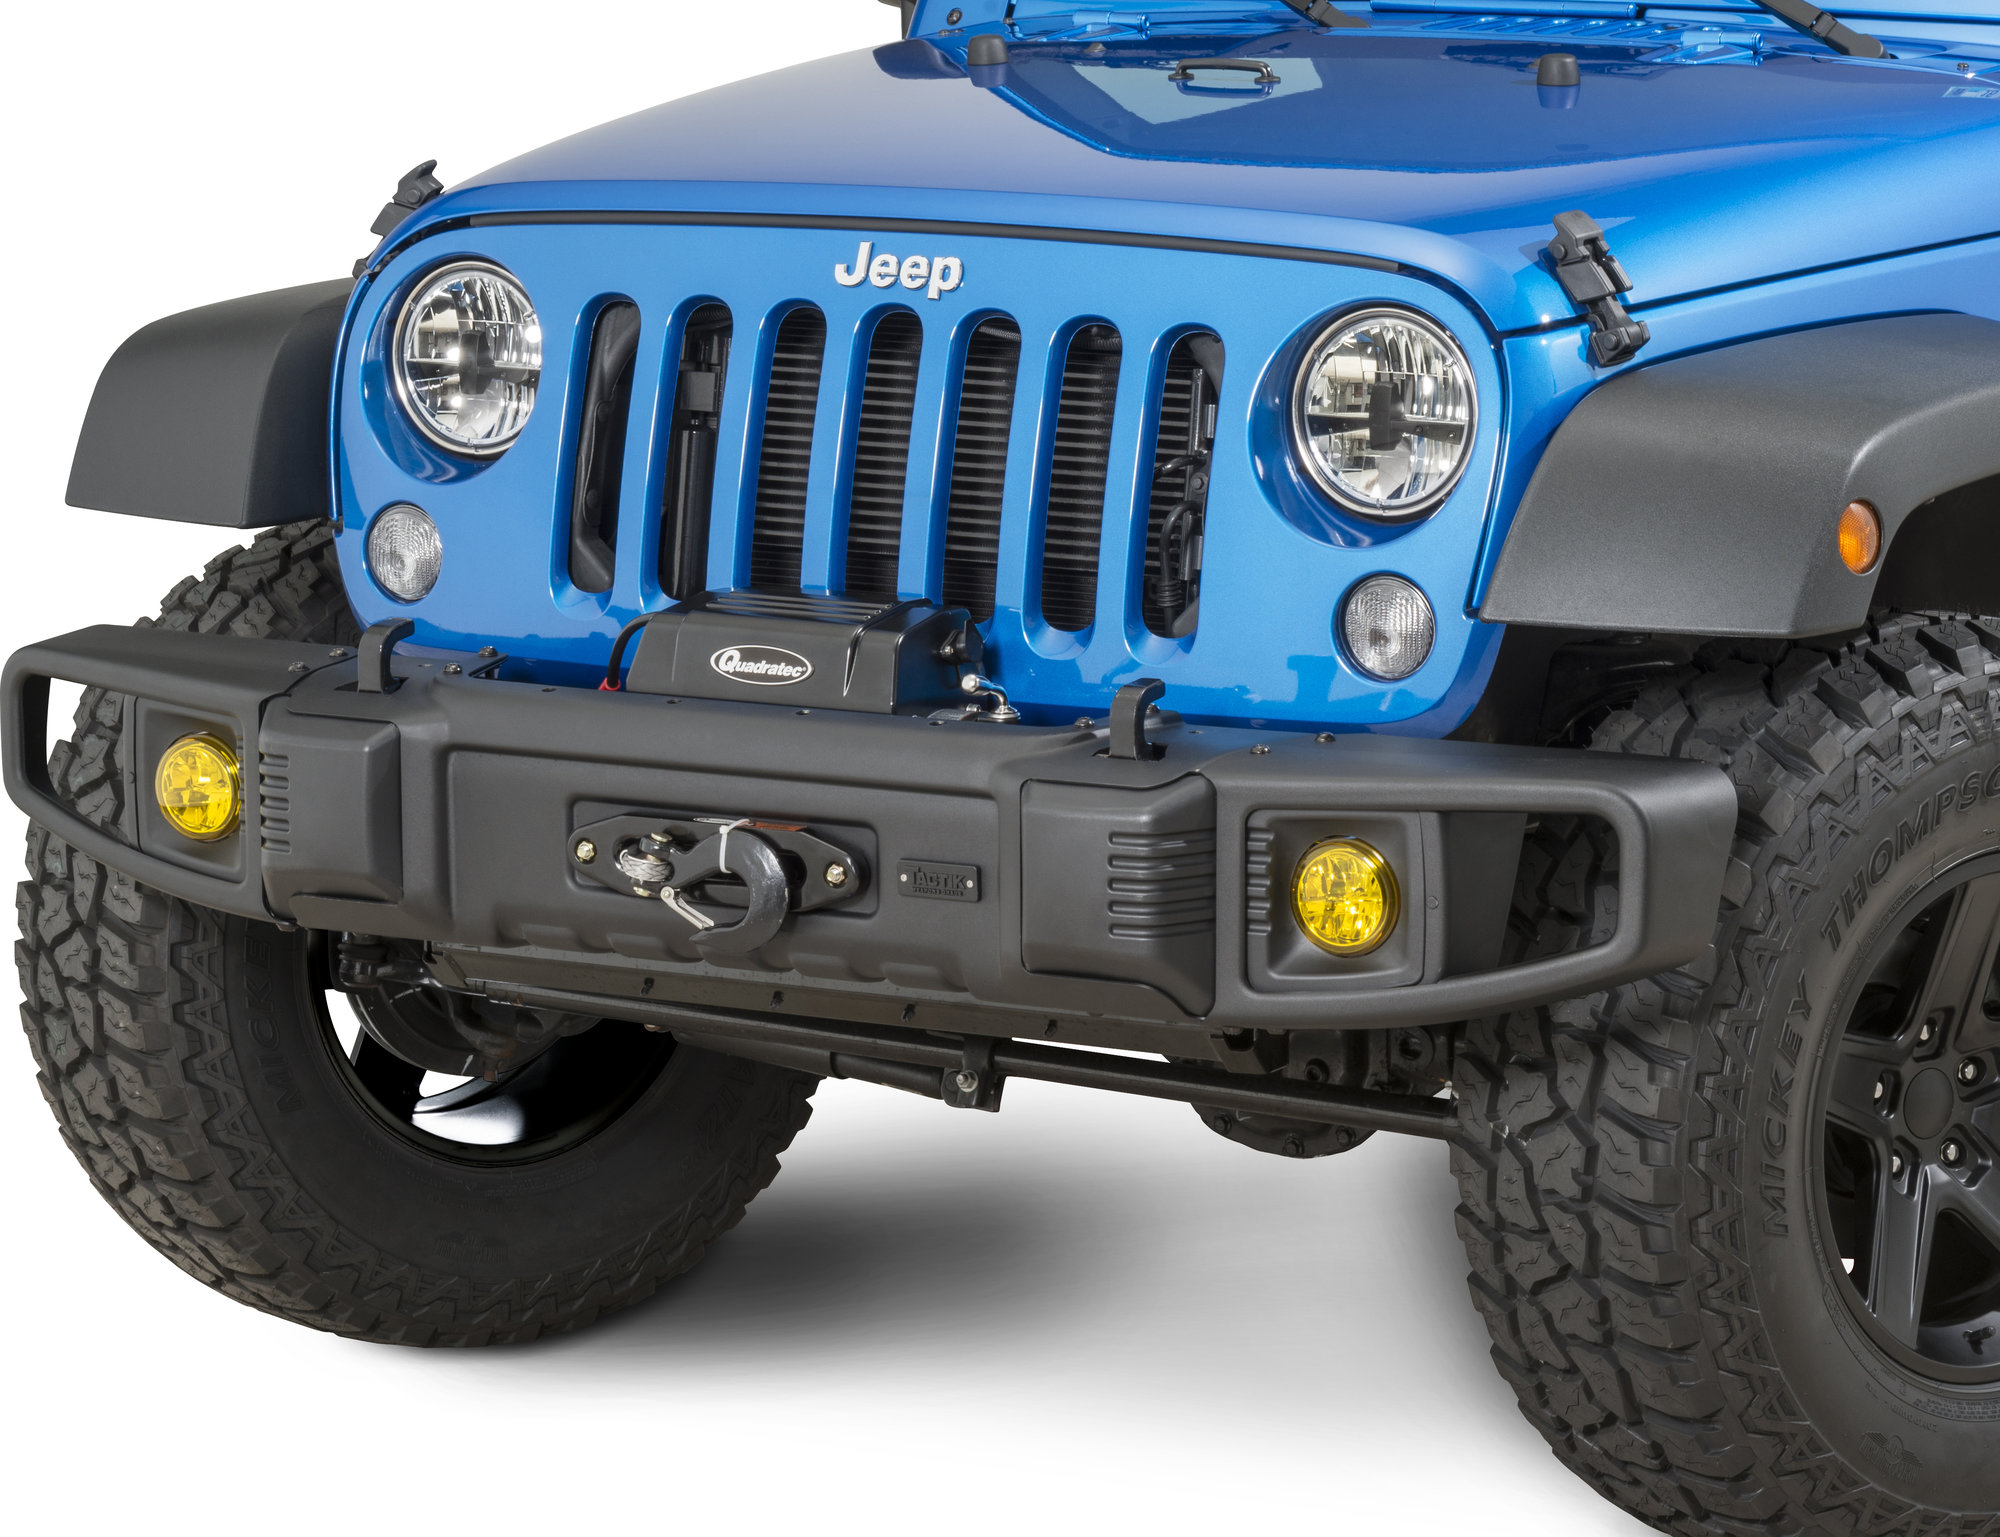 Top 10 Best Jeep Mods & Upgrades for A New Wrangler Owner | Quadratec